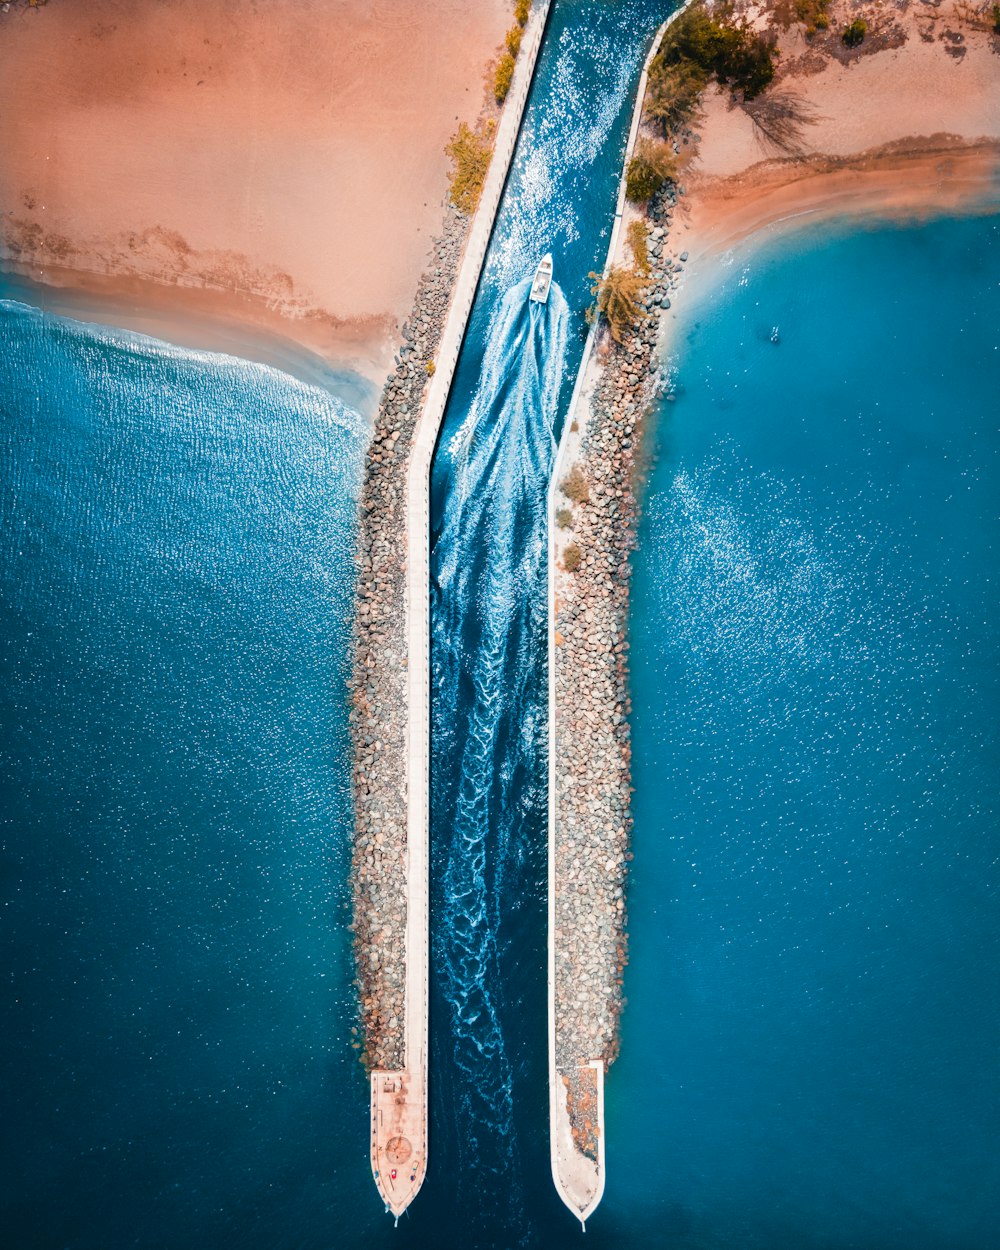 an aerial view of two boats in a body of water